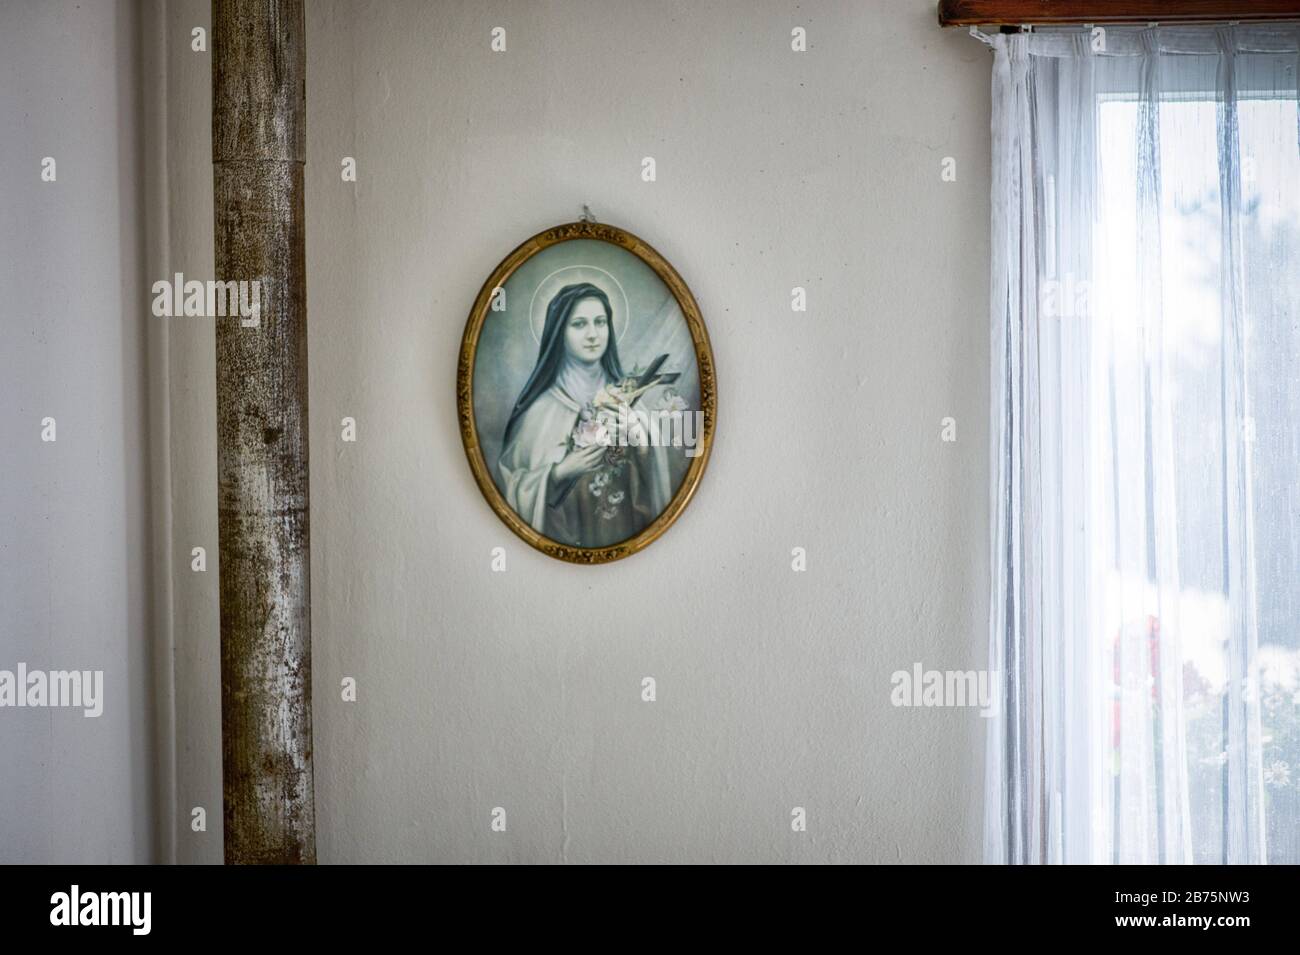 The garden house of Therese Neuman, called Resl von Konnersreuth, in her native town Konnersreuth in the Upper Palatinate. Therese Neumann achieved national fame as a Catholic mystic and through her stigmata. The portrait shows her with halo. [automated translation] Stock Photo